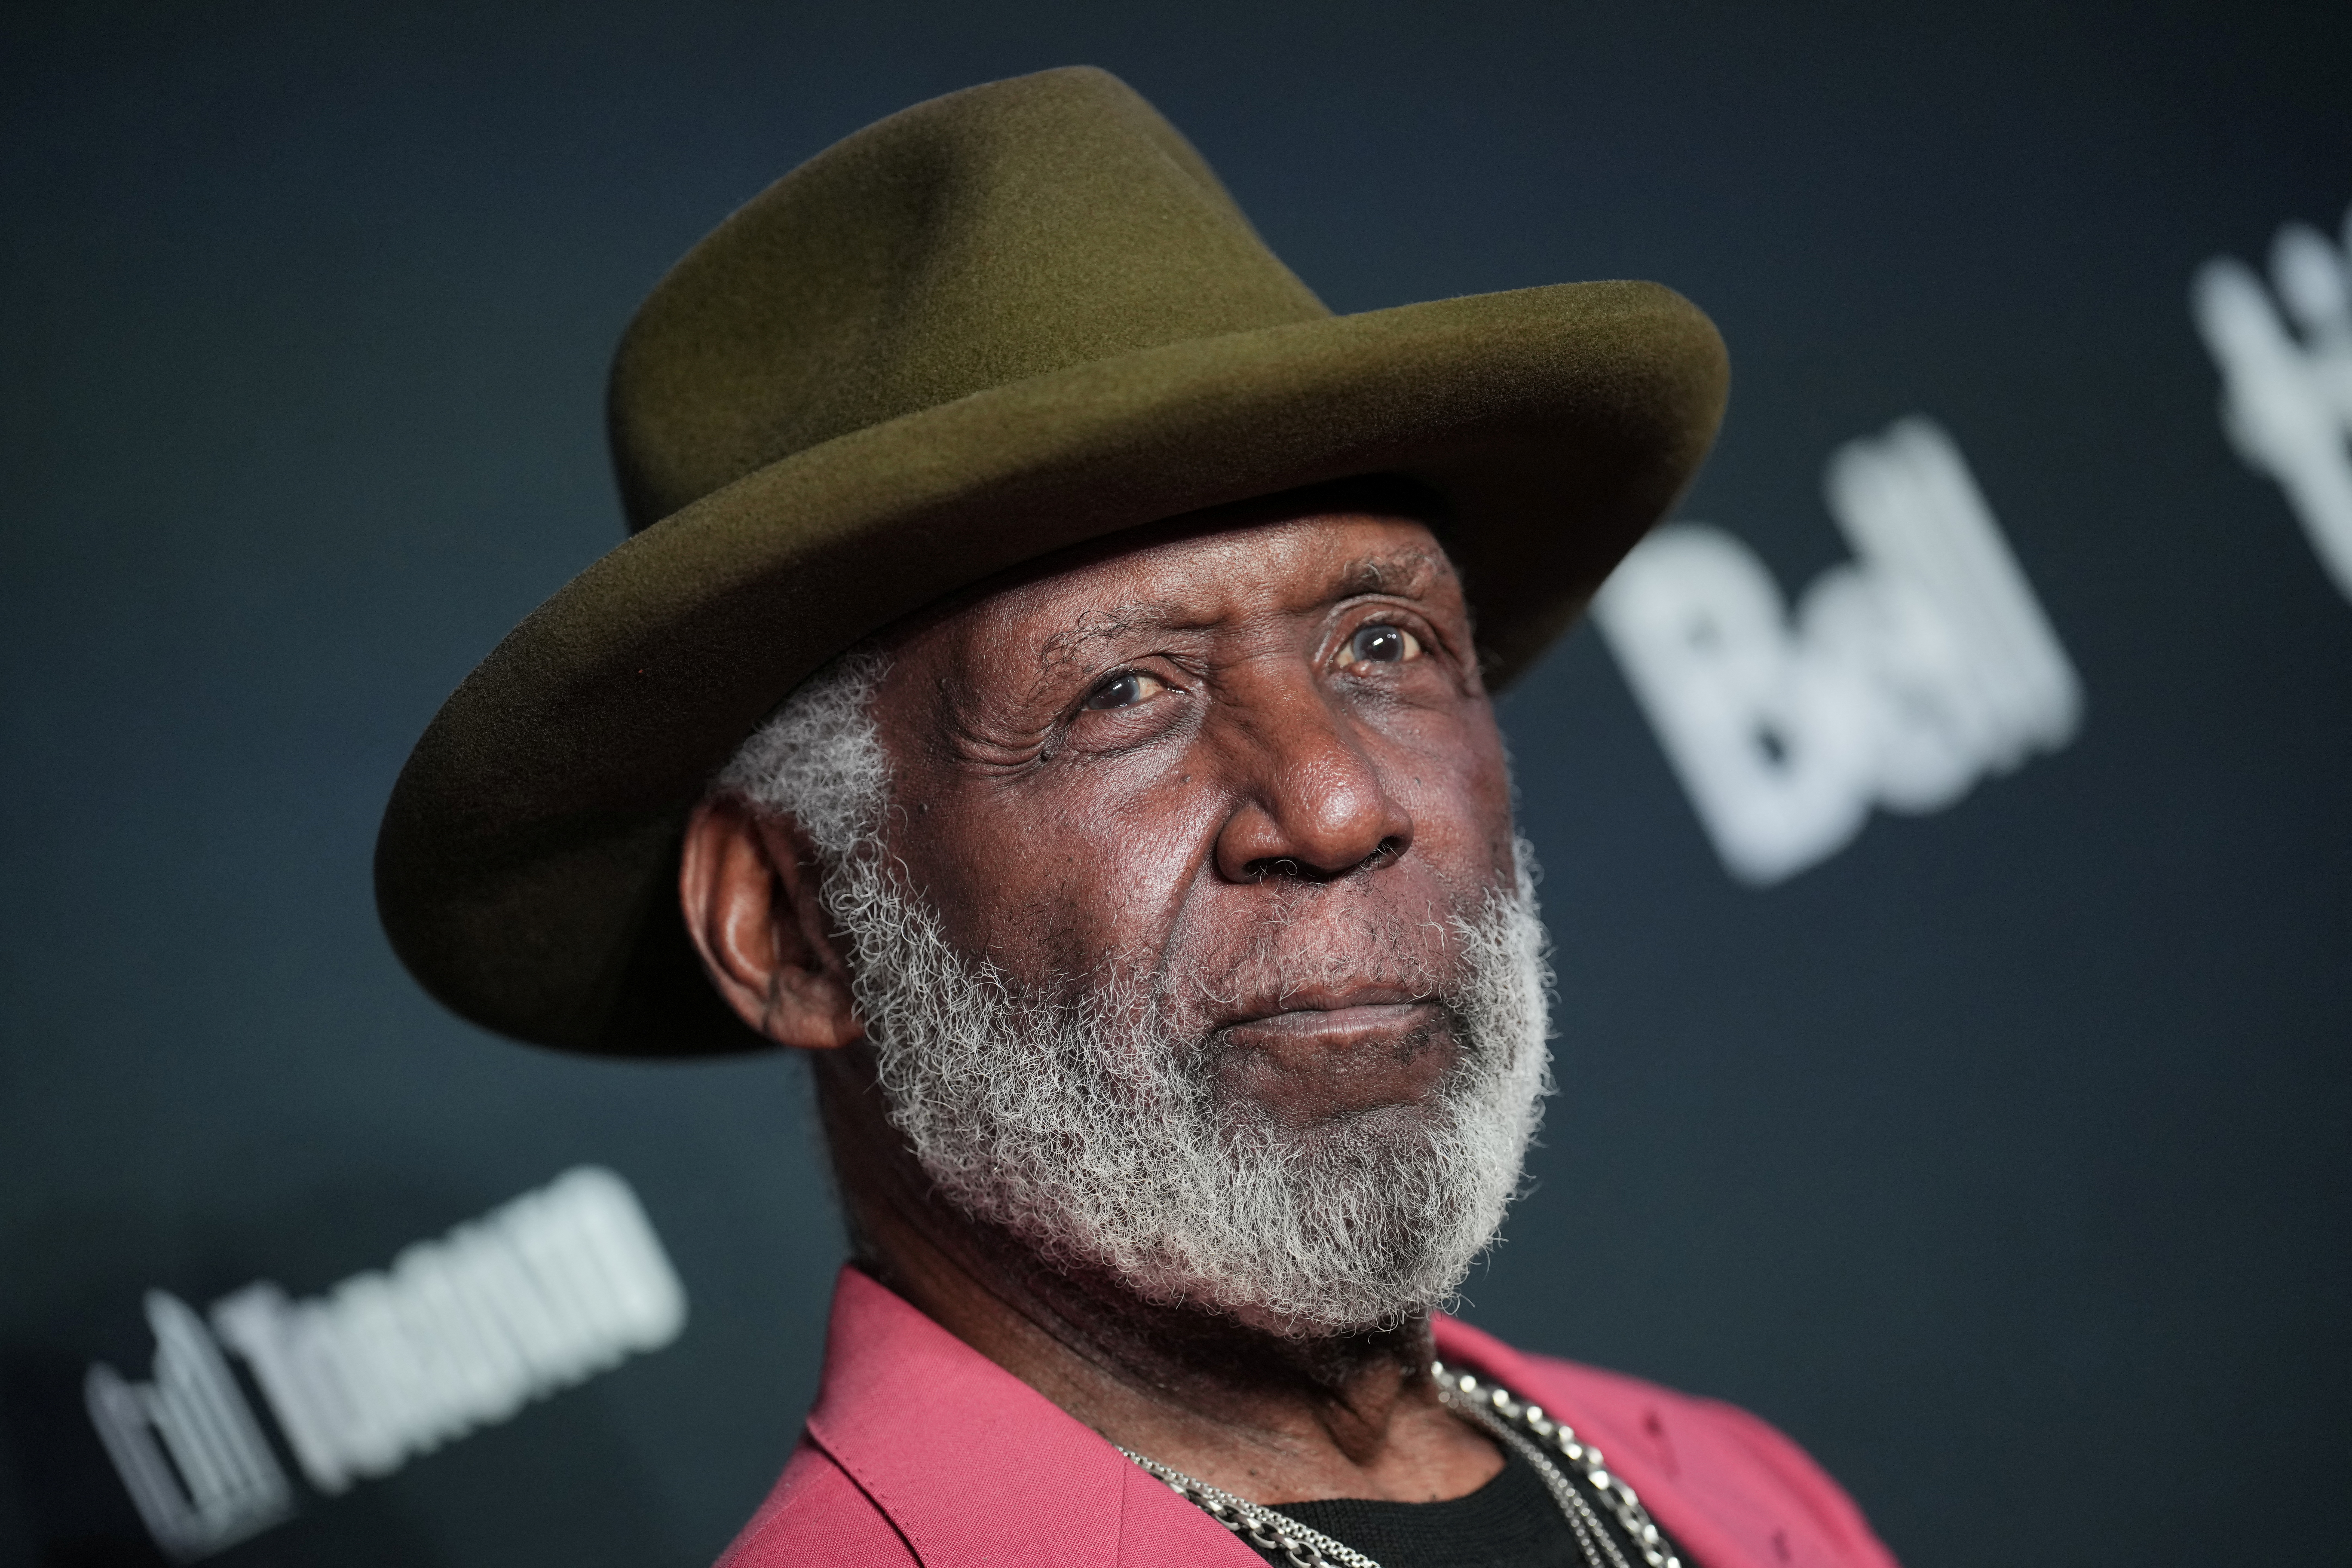 Richard Roundtree, Black action hero who played 'Shaft,' dead at 81